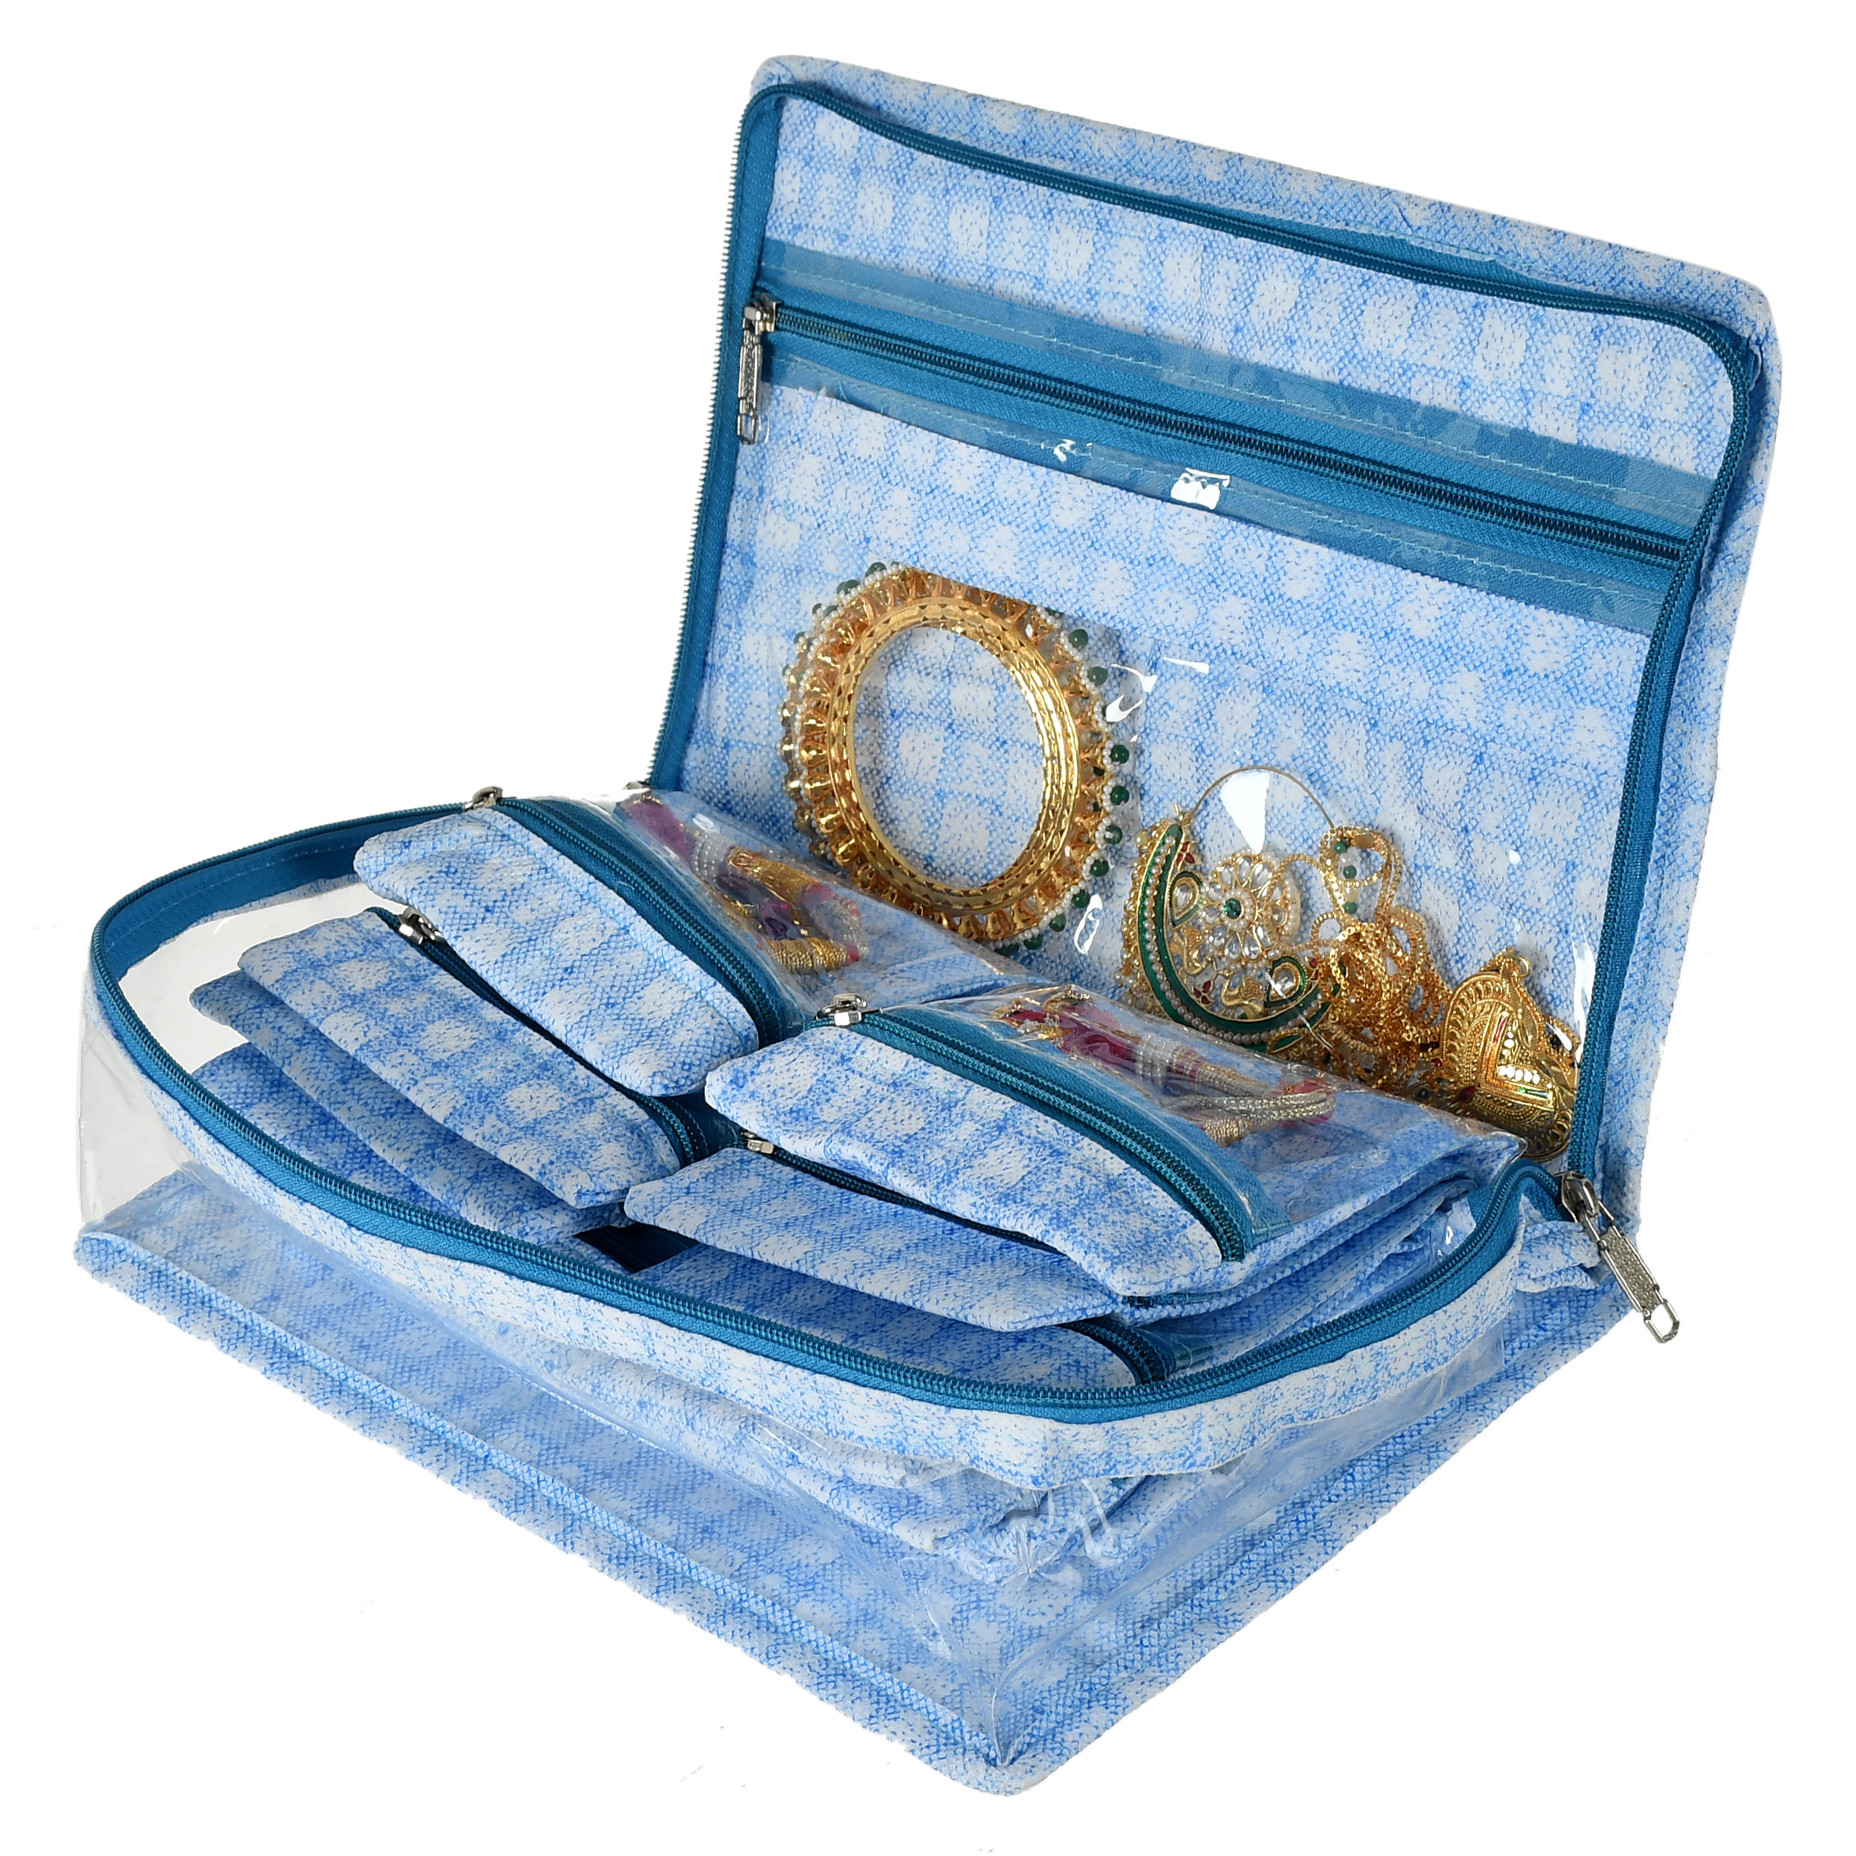 Kuber Industries Check Design Laminated PVC Travel Jewelry Organiser, Jewelry Storage Bags for Necklace, Earrings, Rings, Bracelet With 13 Transparent Pouches (Blue)-HS_38_KUBMART21257